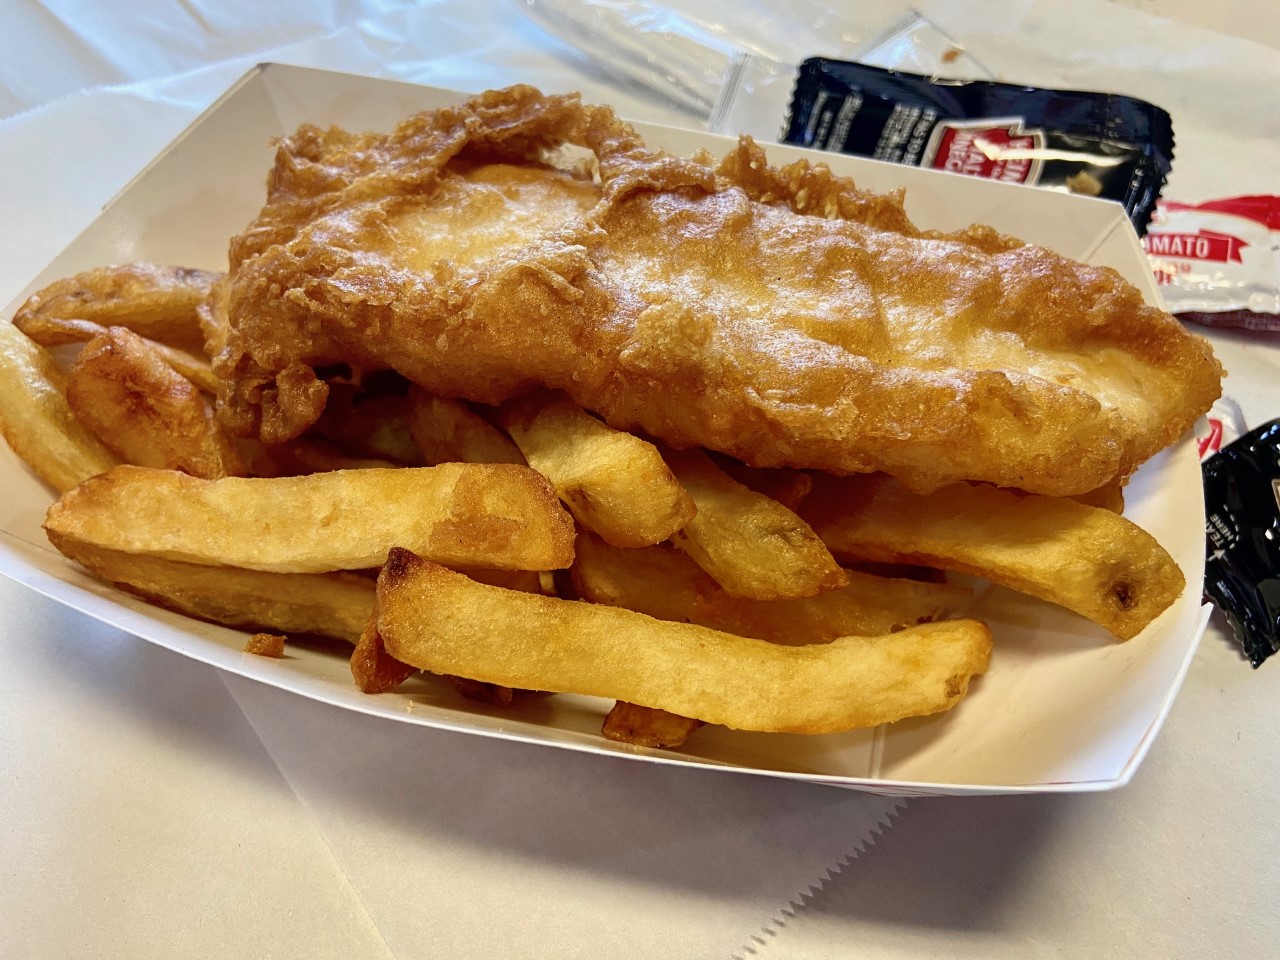 The CODfather, Proper Fish & Chips